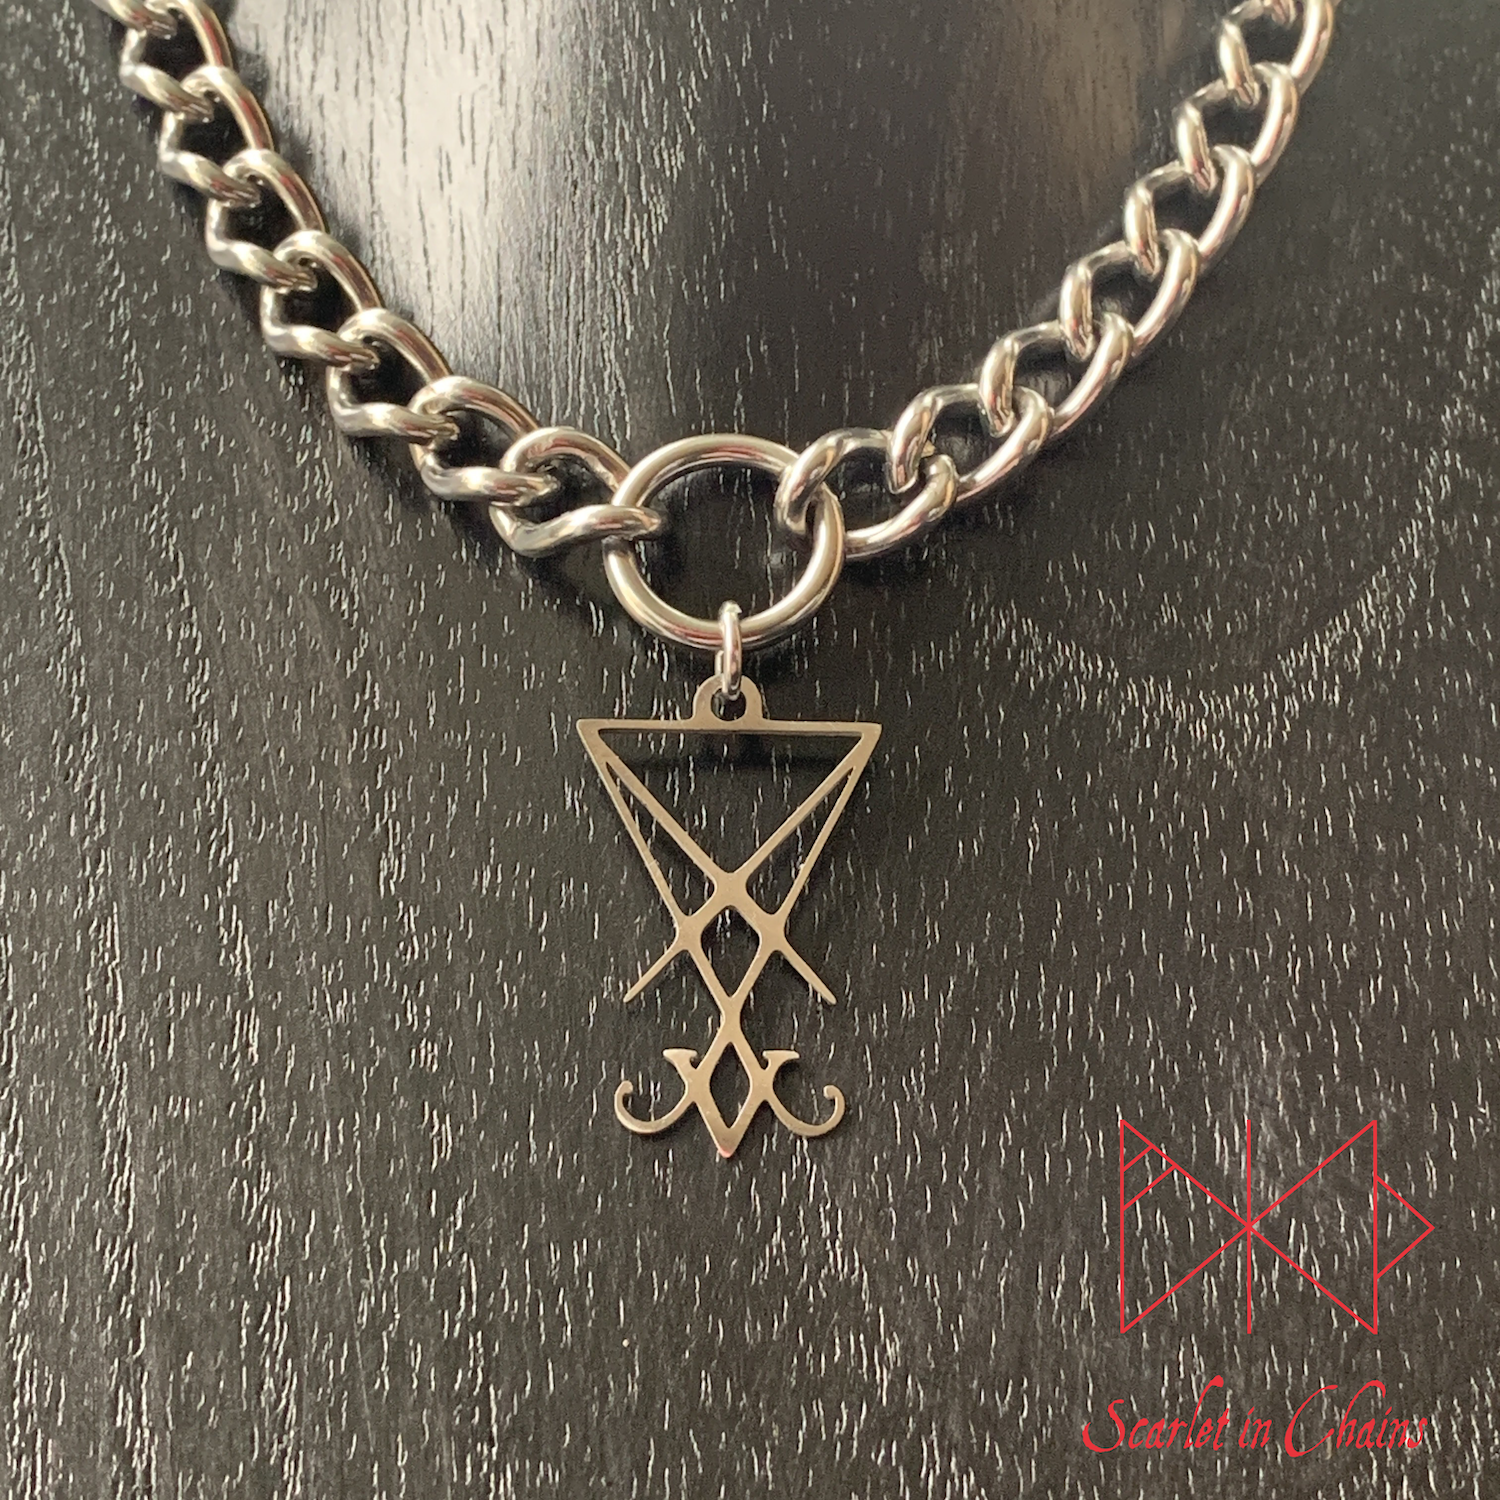 Stainless Steel Lucifer Sigil charm necklace, day collar, Witch necklace, witchy necklace, Shown close